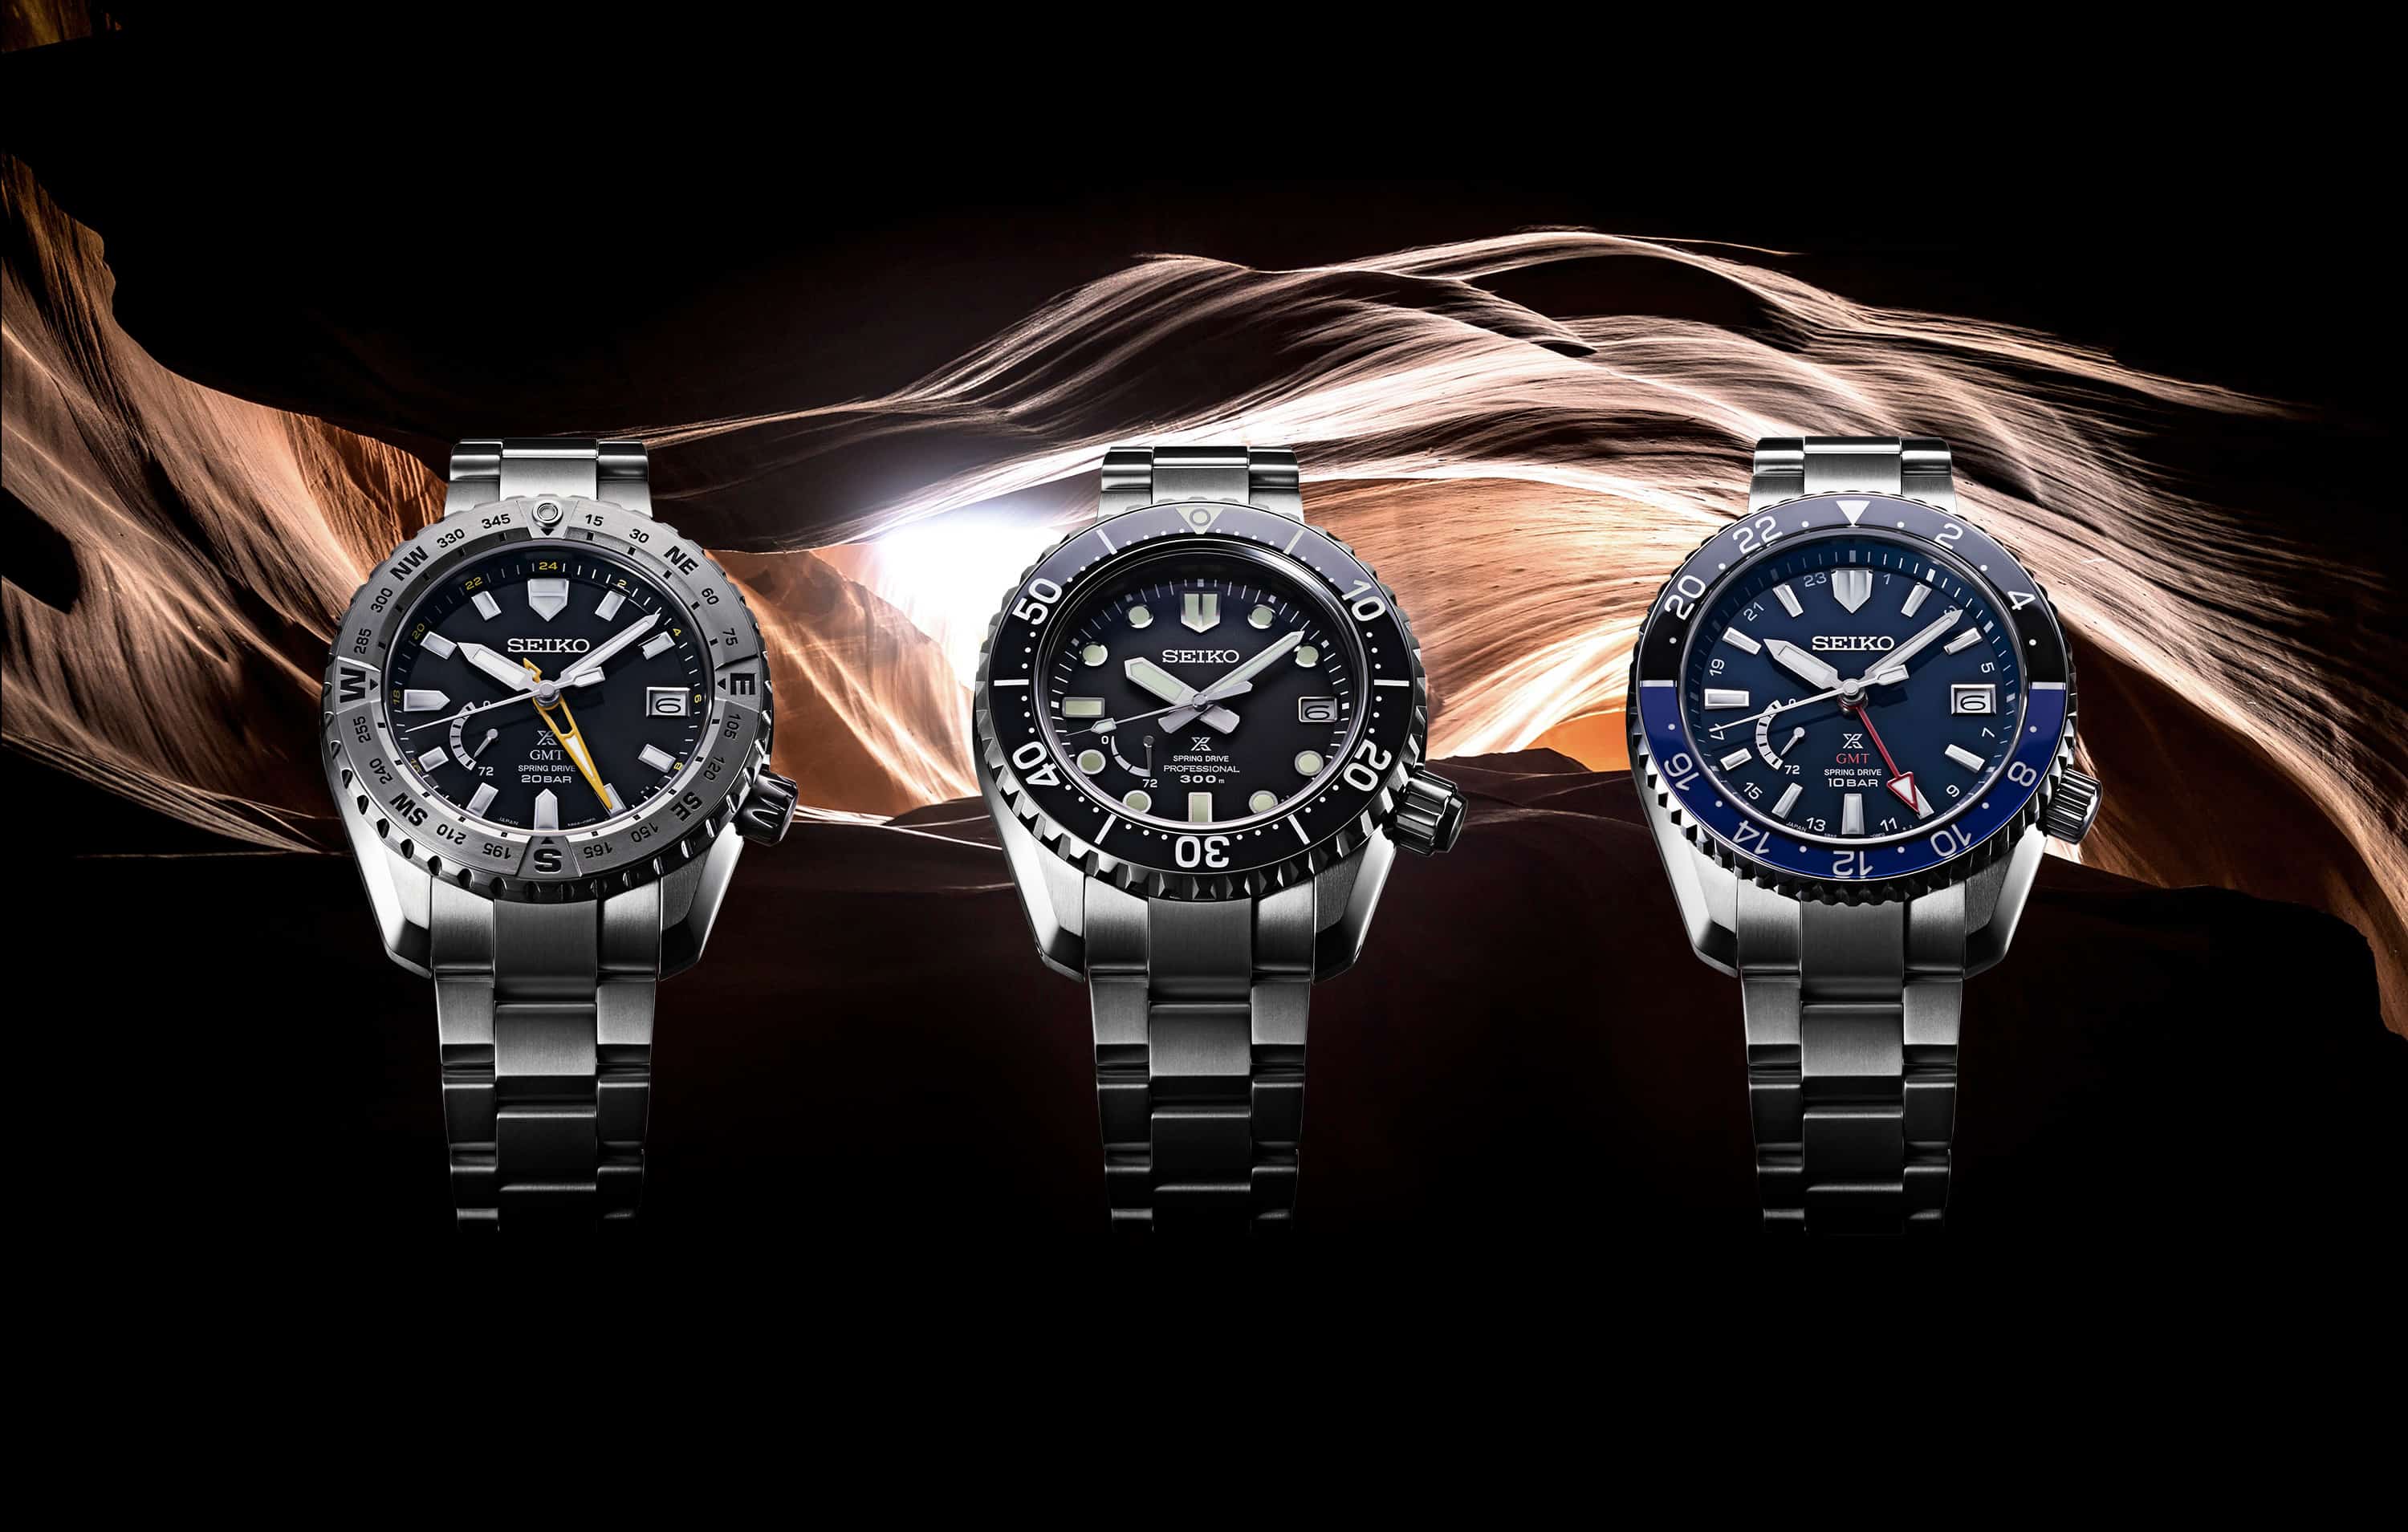 Baselworld 2019: Introducing Seiko’s Prospex LX Collection, Tool Watches for Land, Sea, and Sky